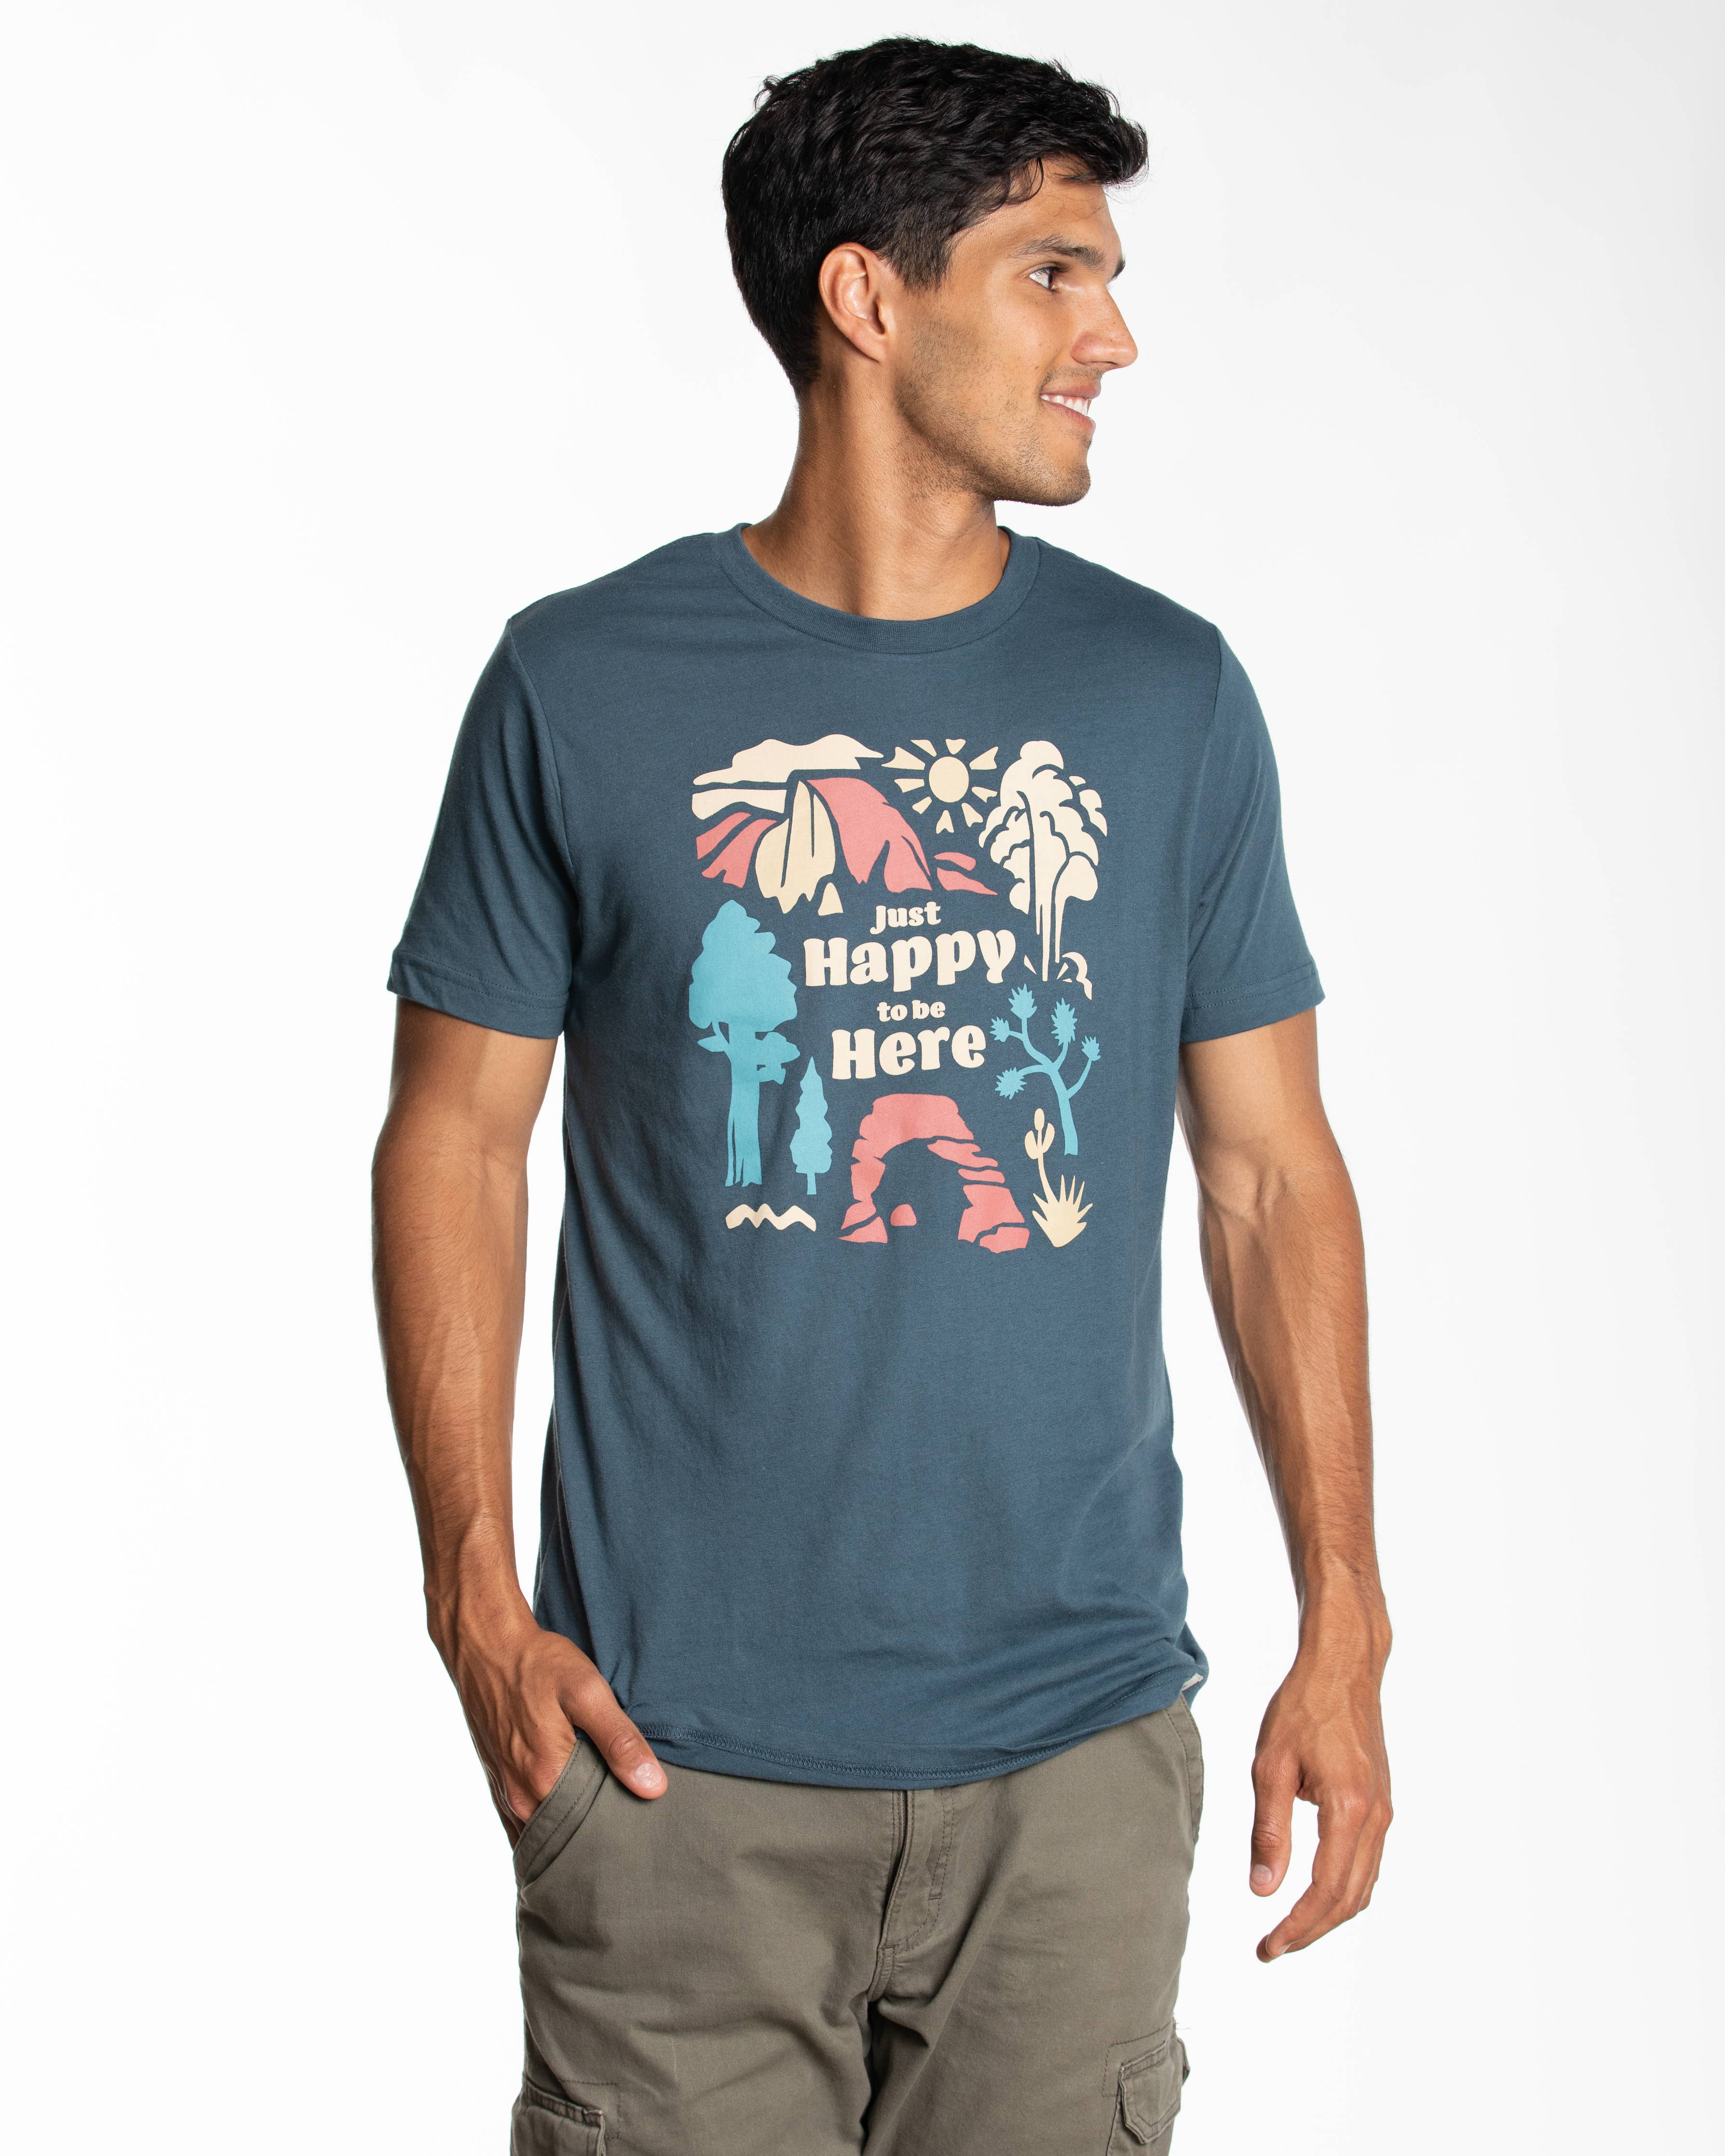 Just Happy to Be Here T-Shirt